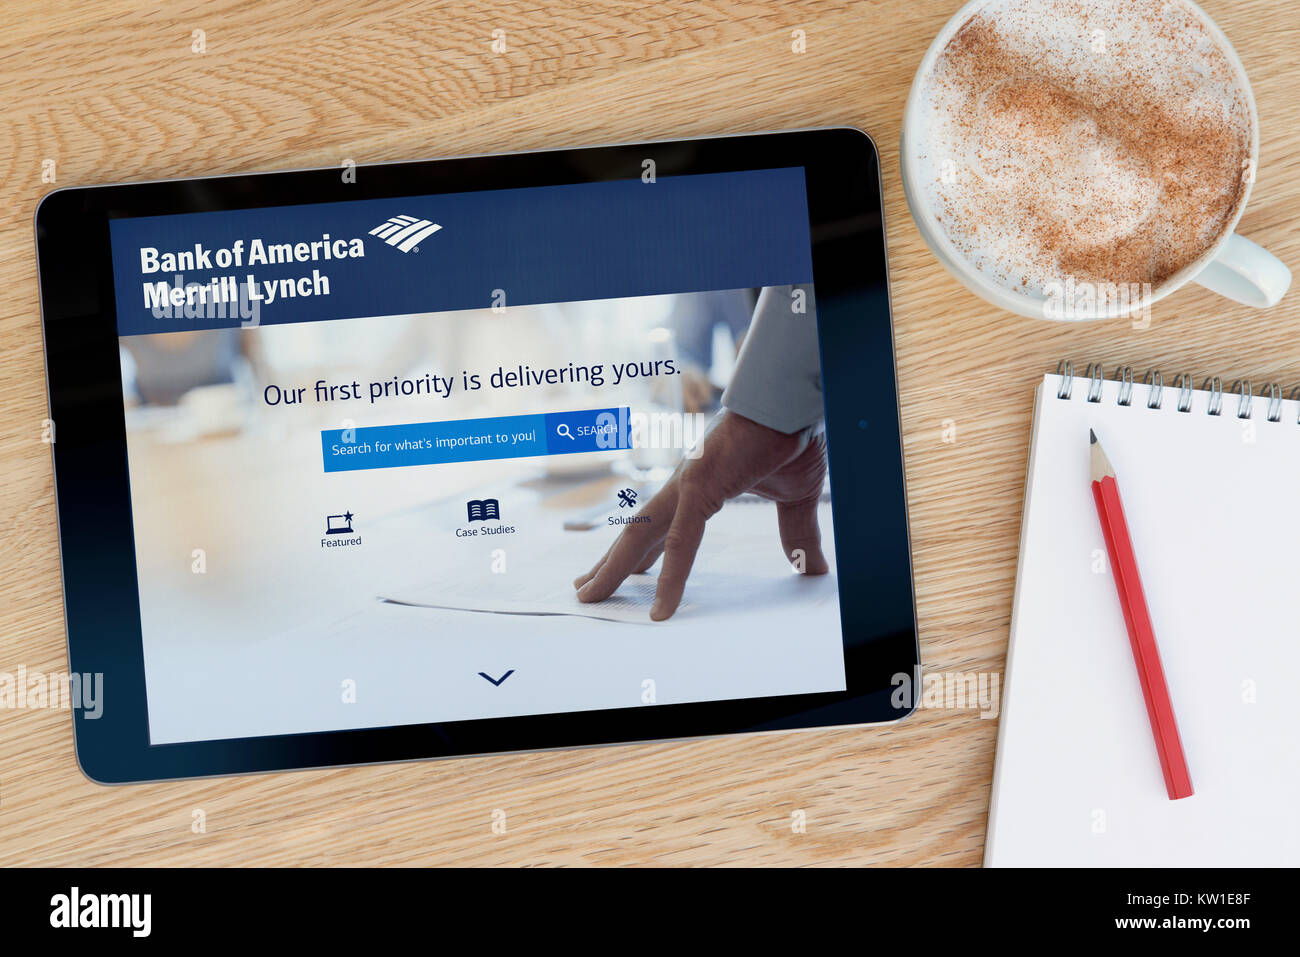 The Merrill Lynch bank website on an iPad tablet device, resting on a wooden table beside a notepad, pencil and cup of coffee (Editorial only) Stock Photo